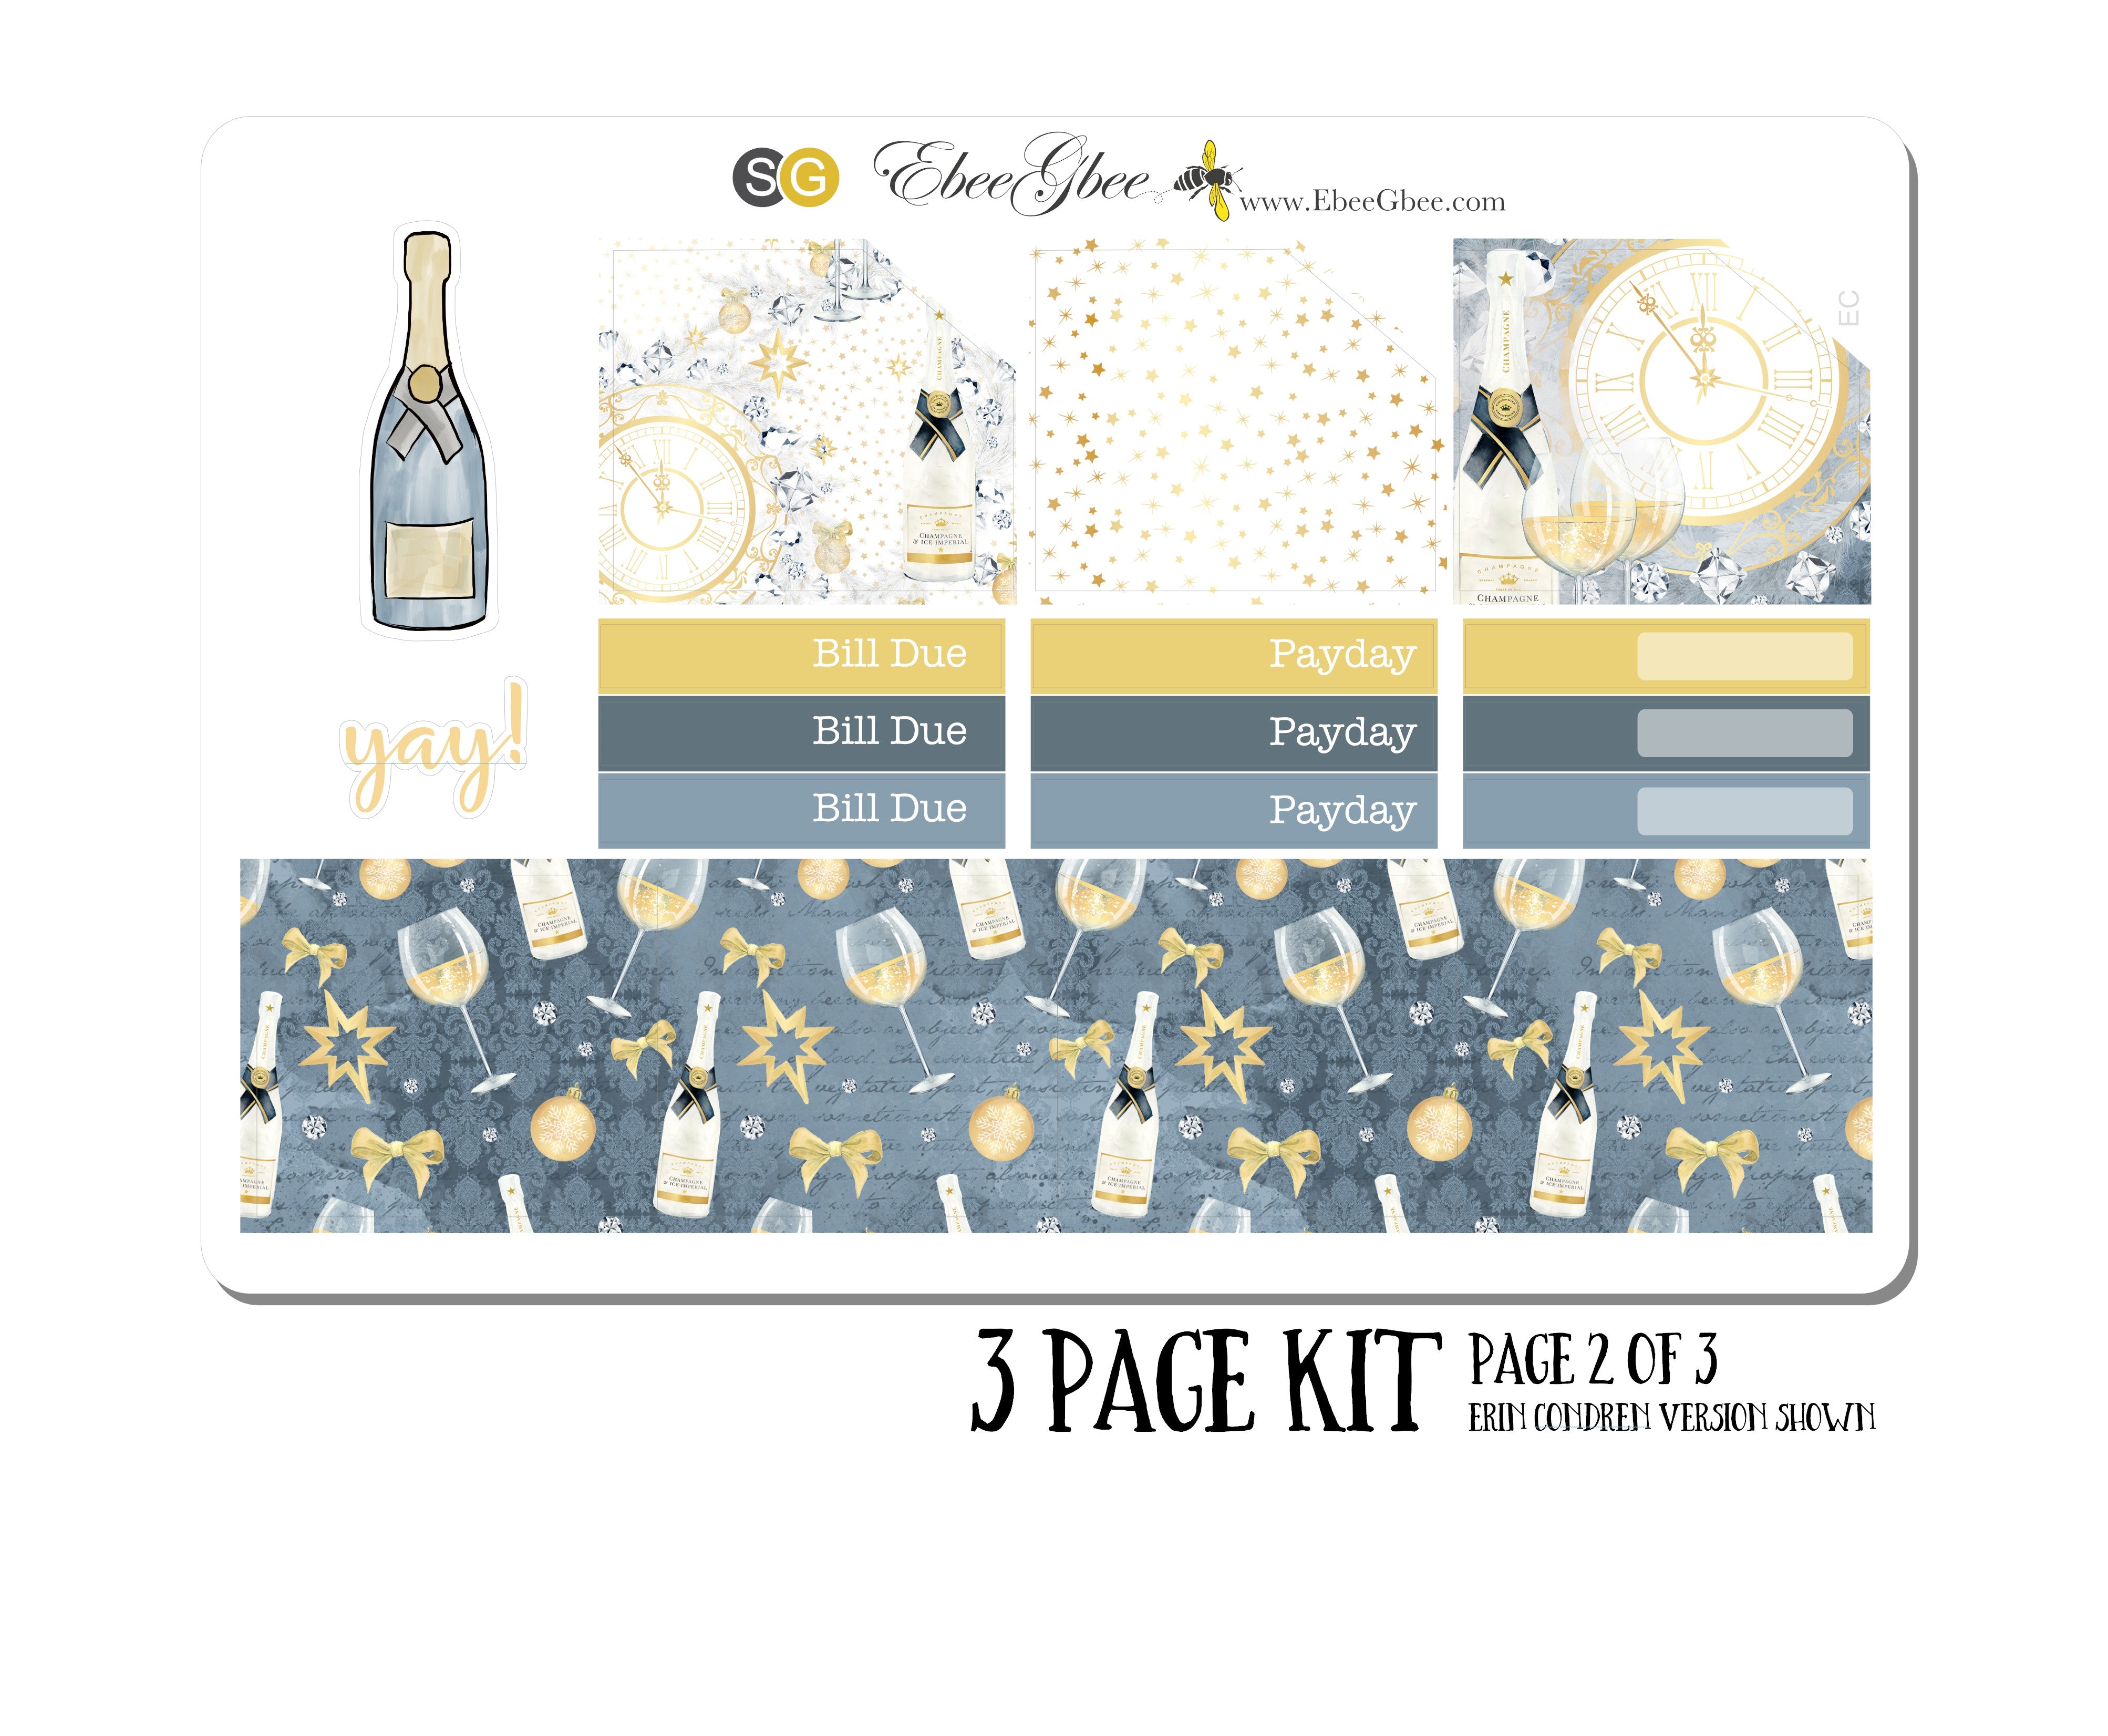 CELEBRATE (NYE) MONTHLY Layout Planner Stickers | You Pick Your Month | Storm Gold